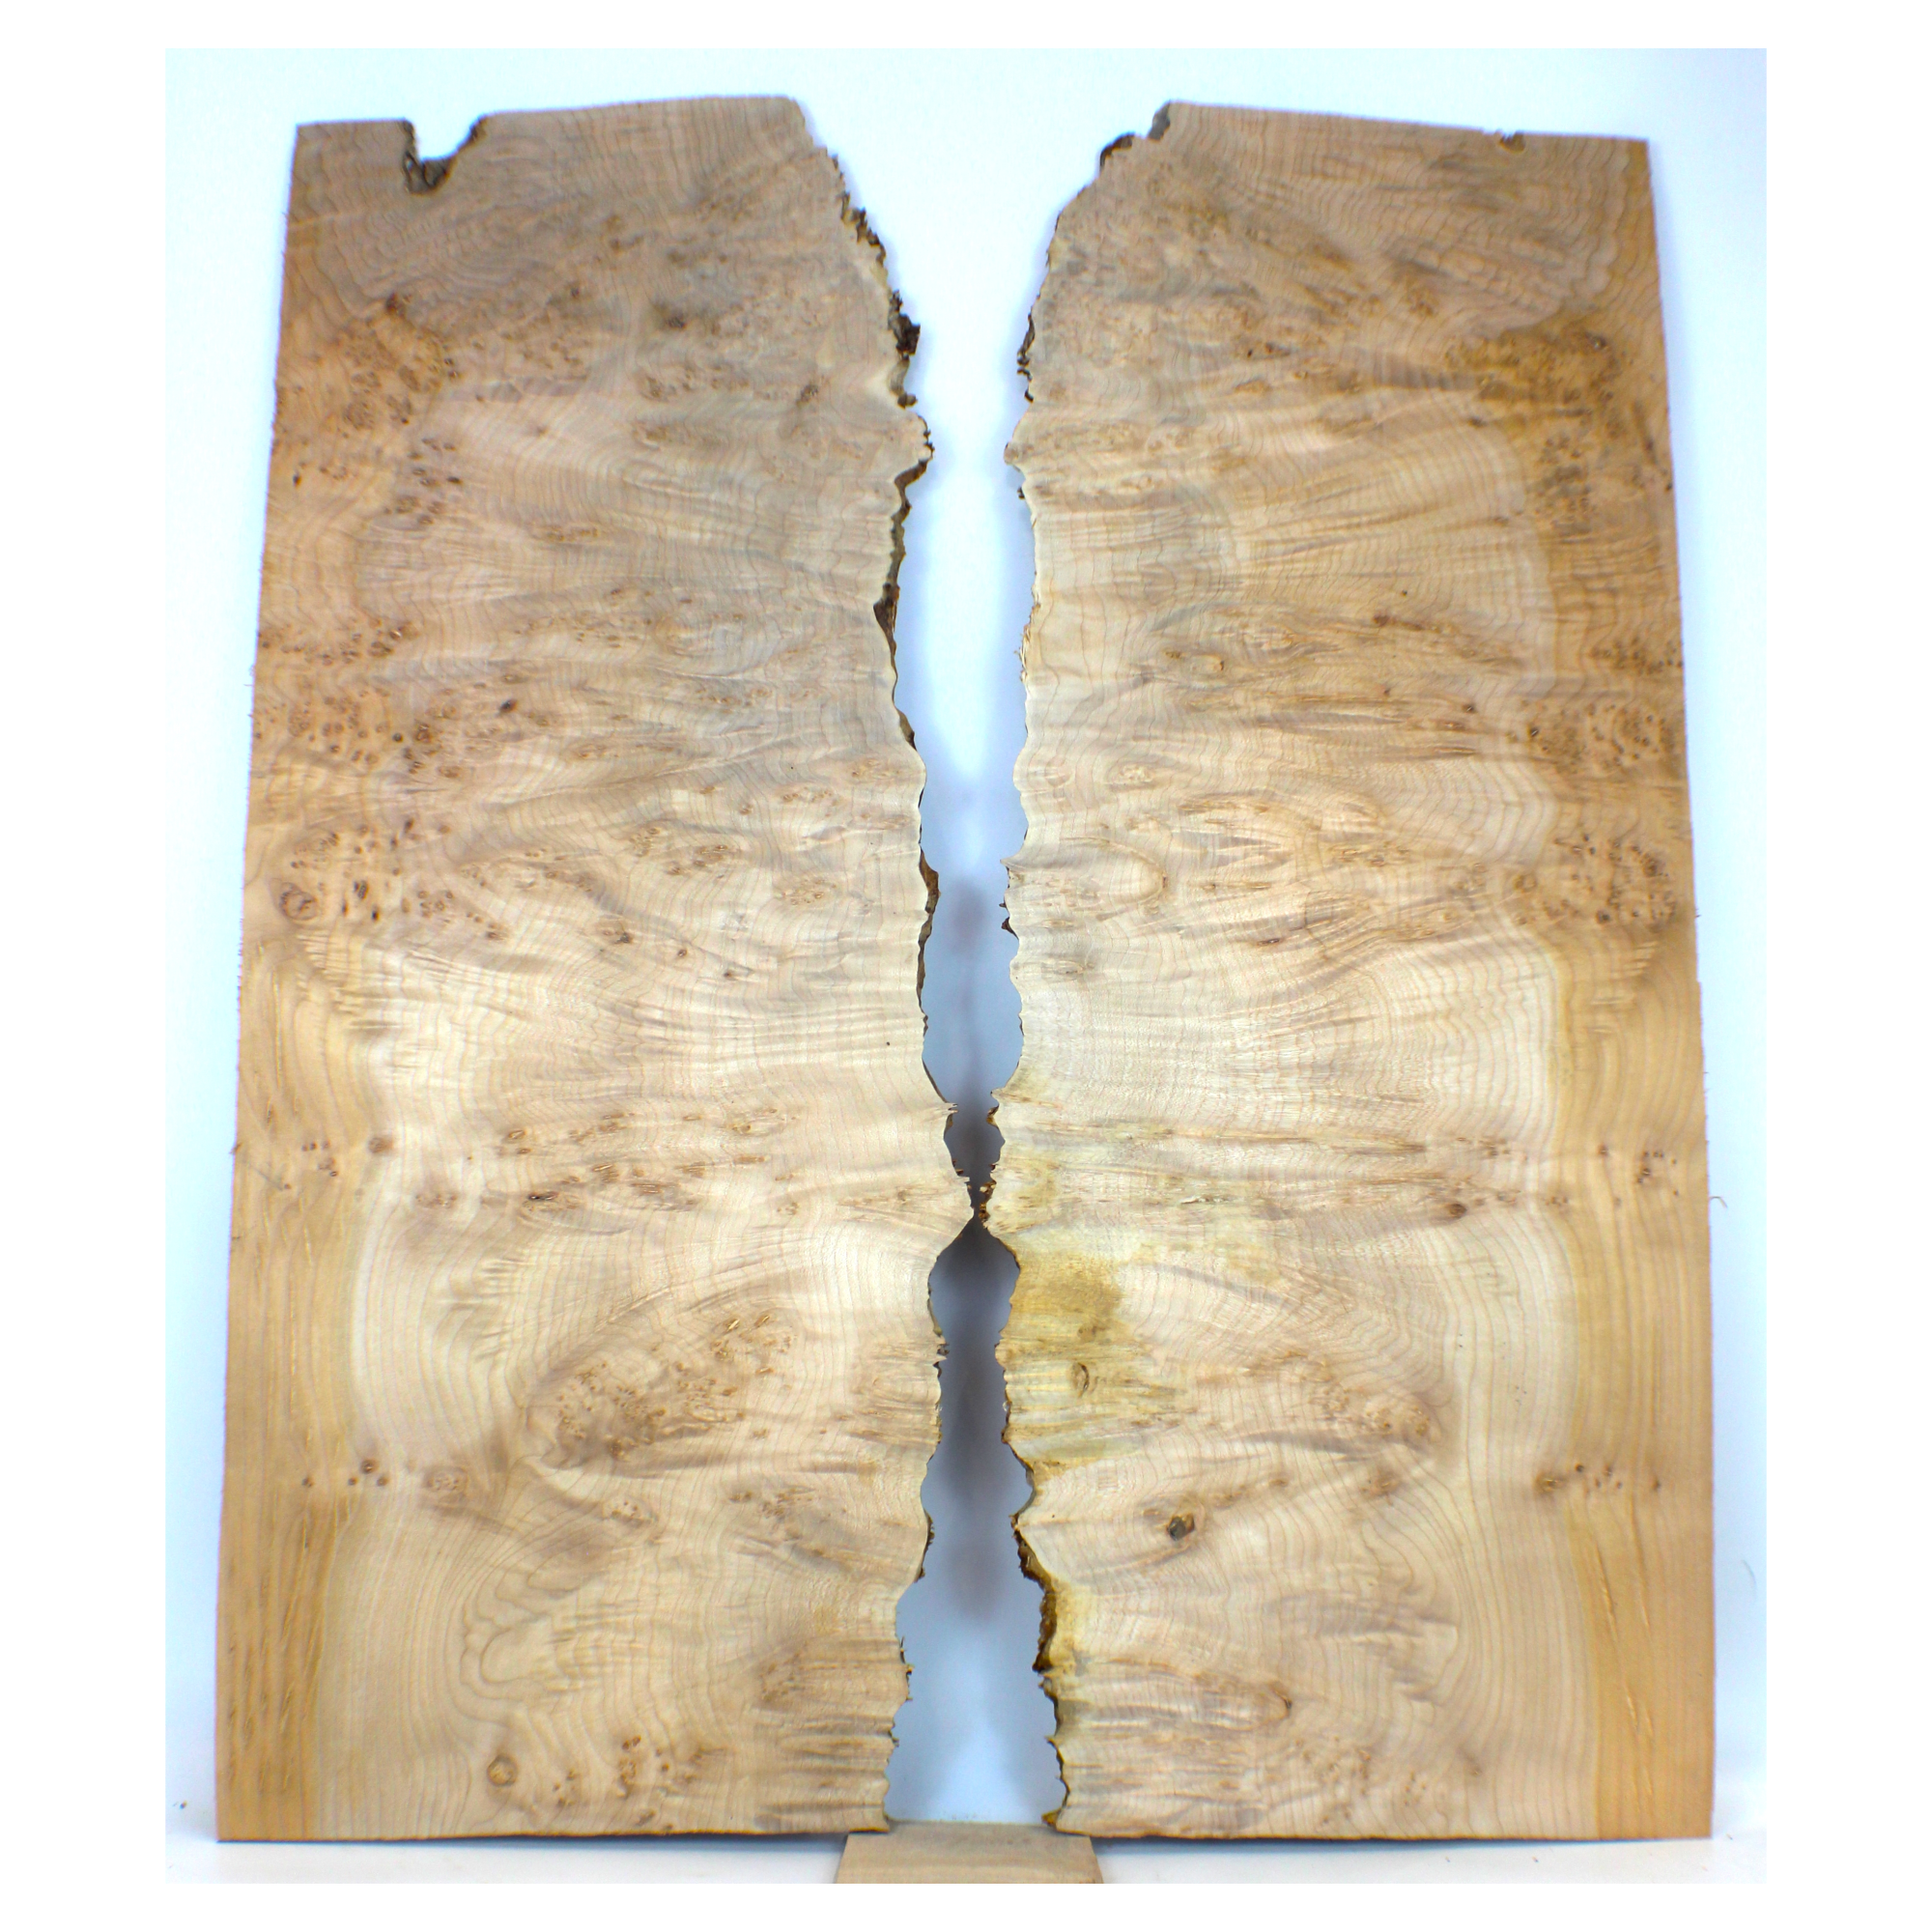 Music grade maple burl 2-piece set with heavy burl eyes, deep rays, and live edge.  This set has been sanded to 400 grit.  Dimensions: Thickness (each piece): .25